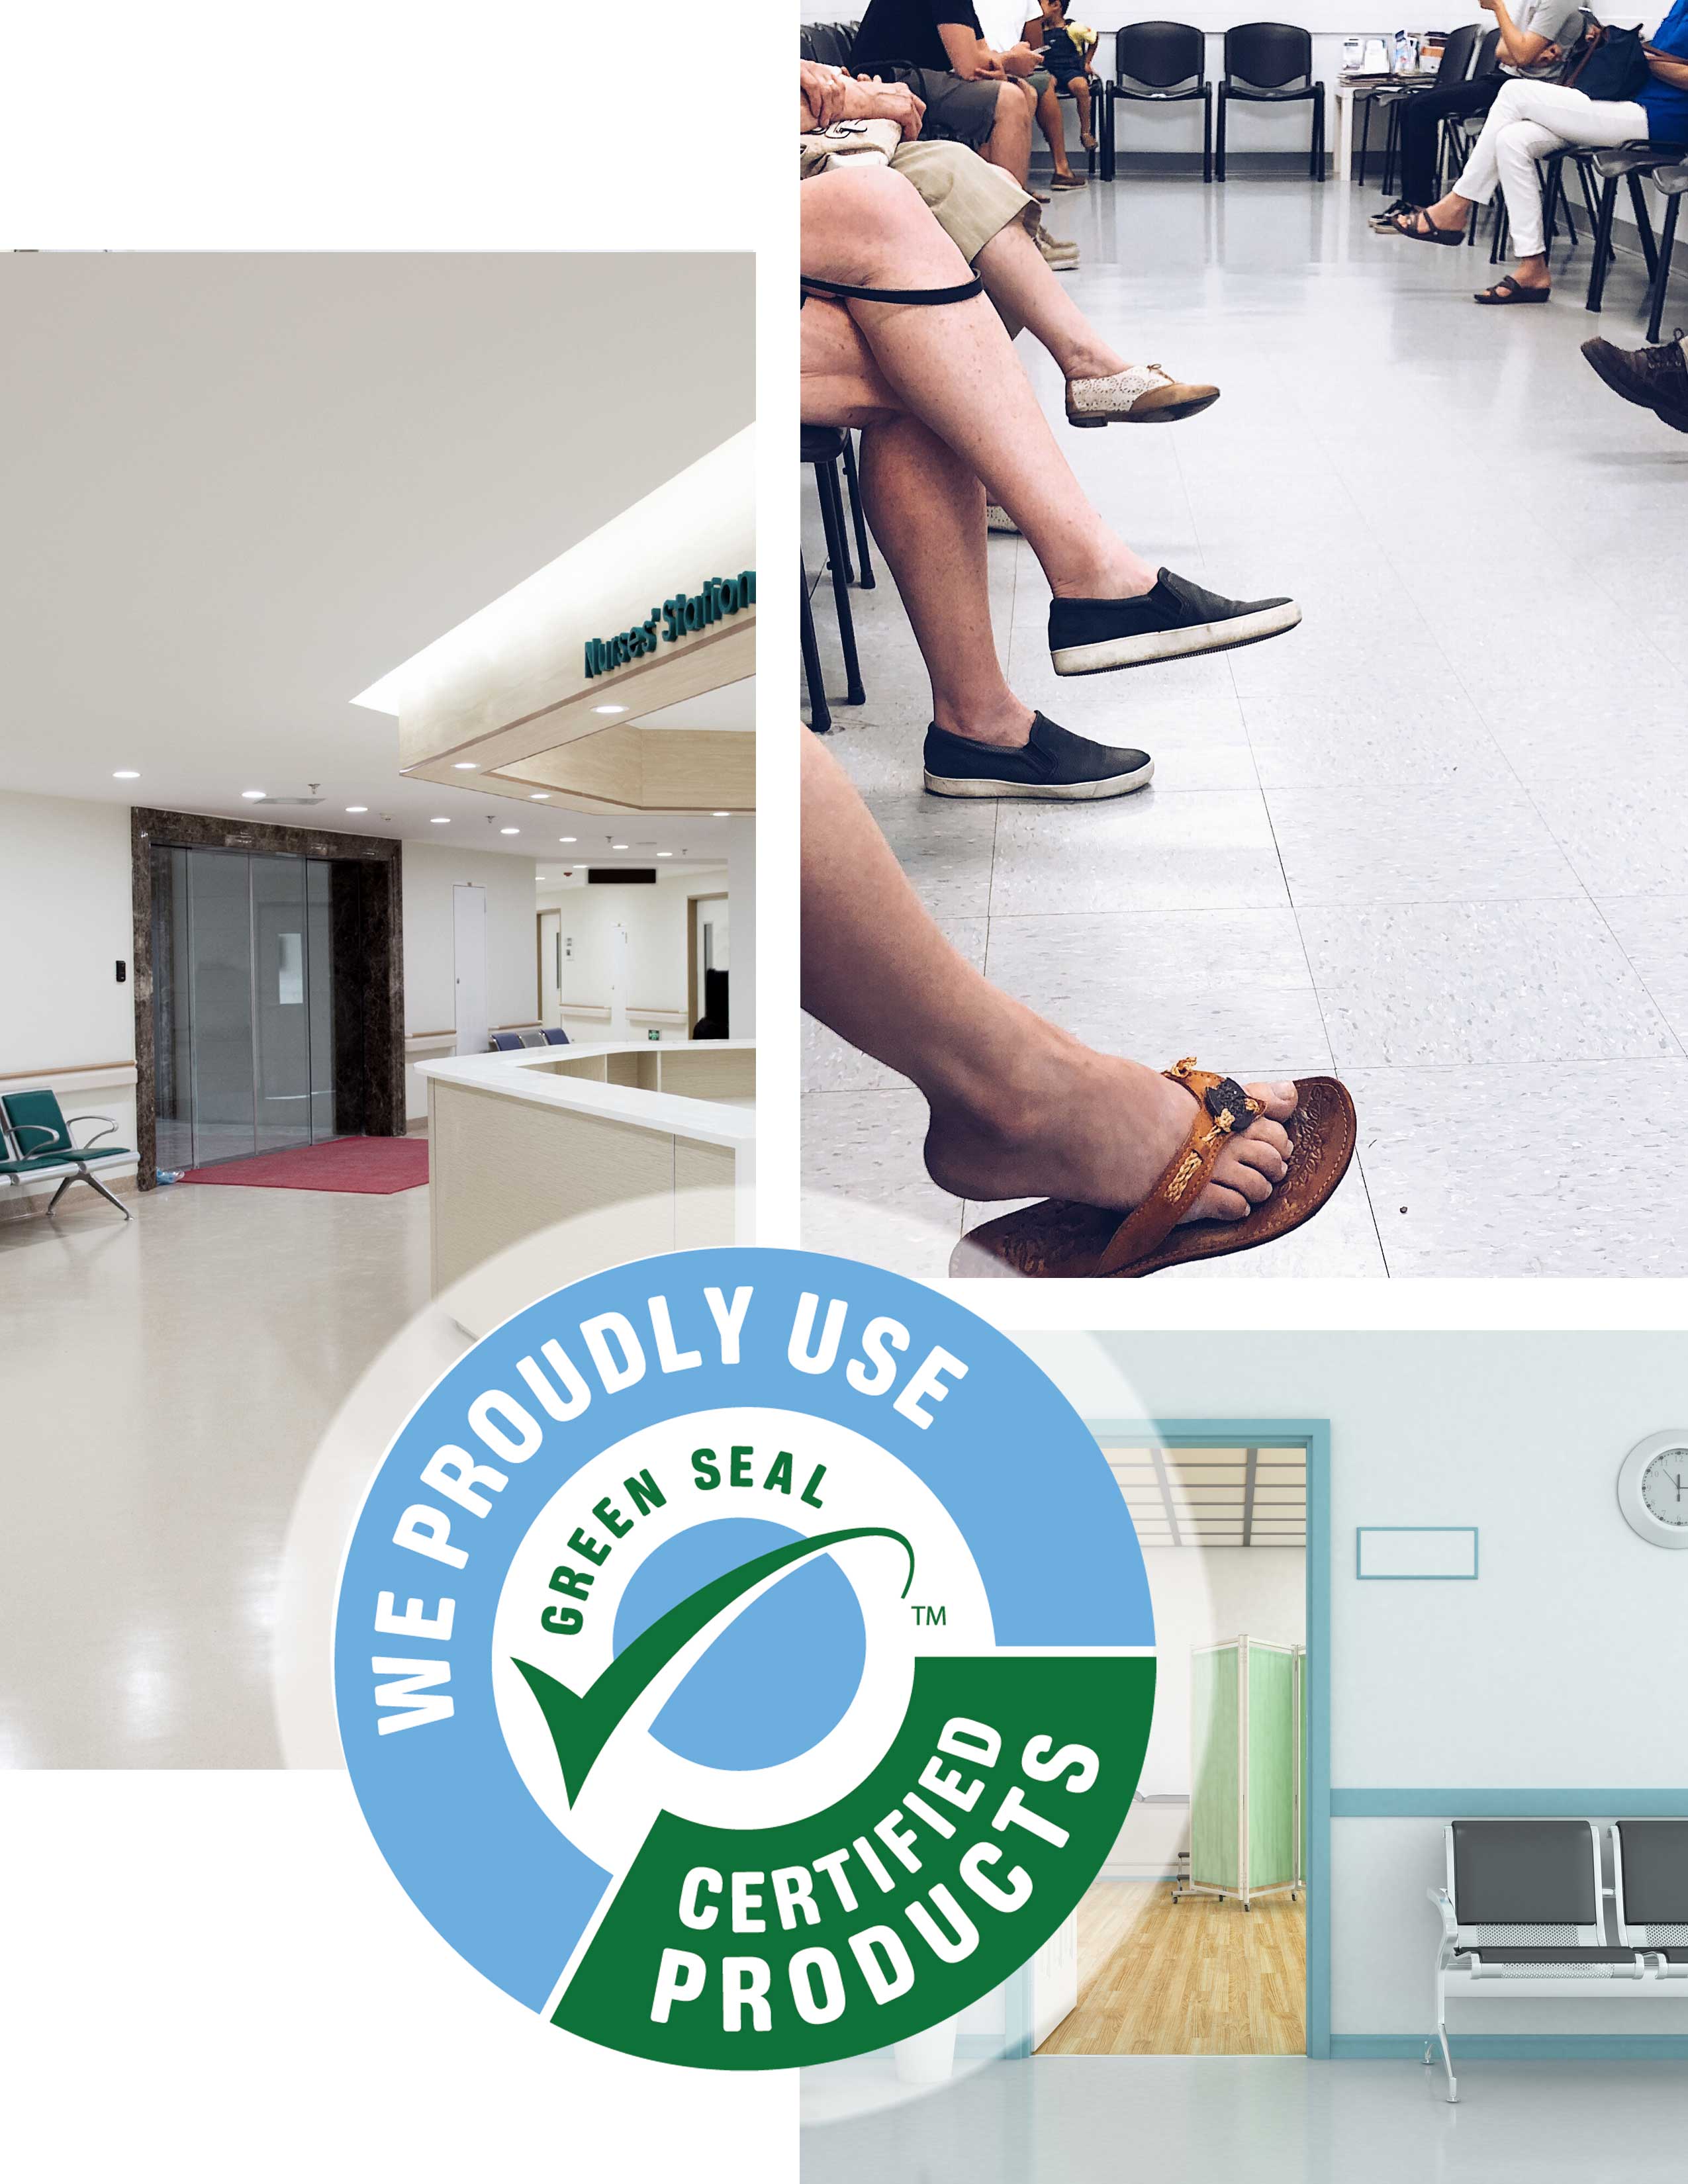 https://www.stratusclean.com/sites/default/files/inline-images/clean-medical-offices.jpg